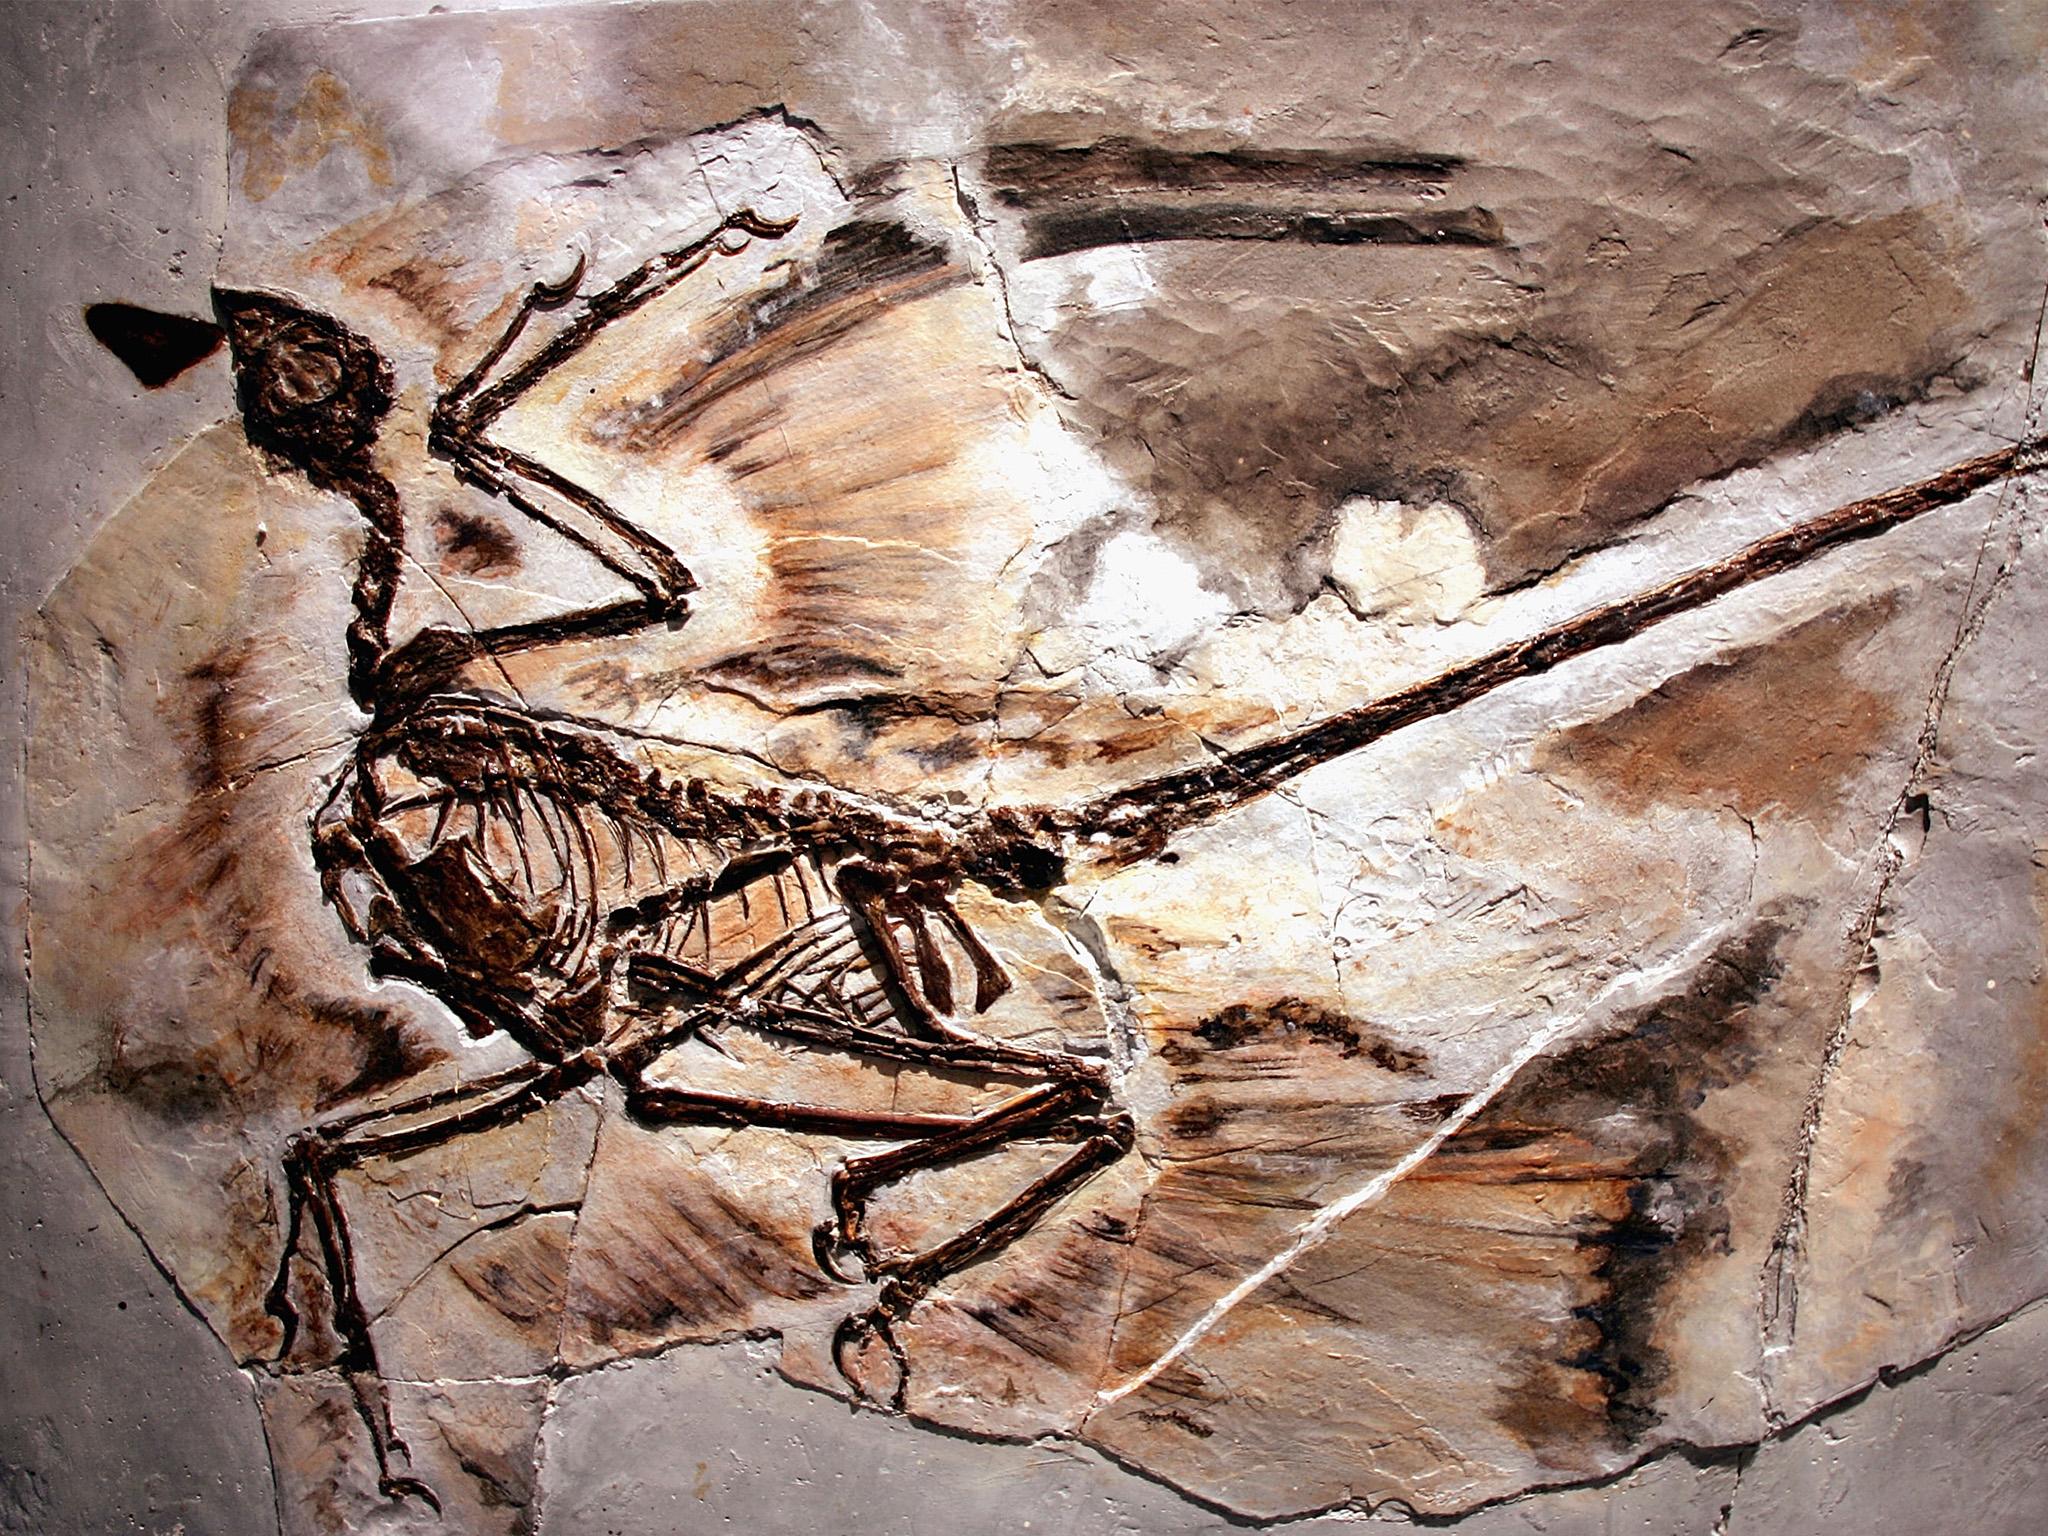 A fossil of a microraptor found in Liaoning Province, China, in 2005